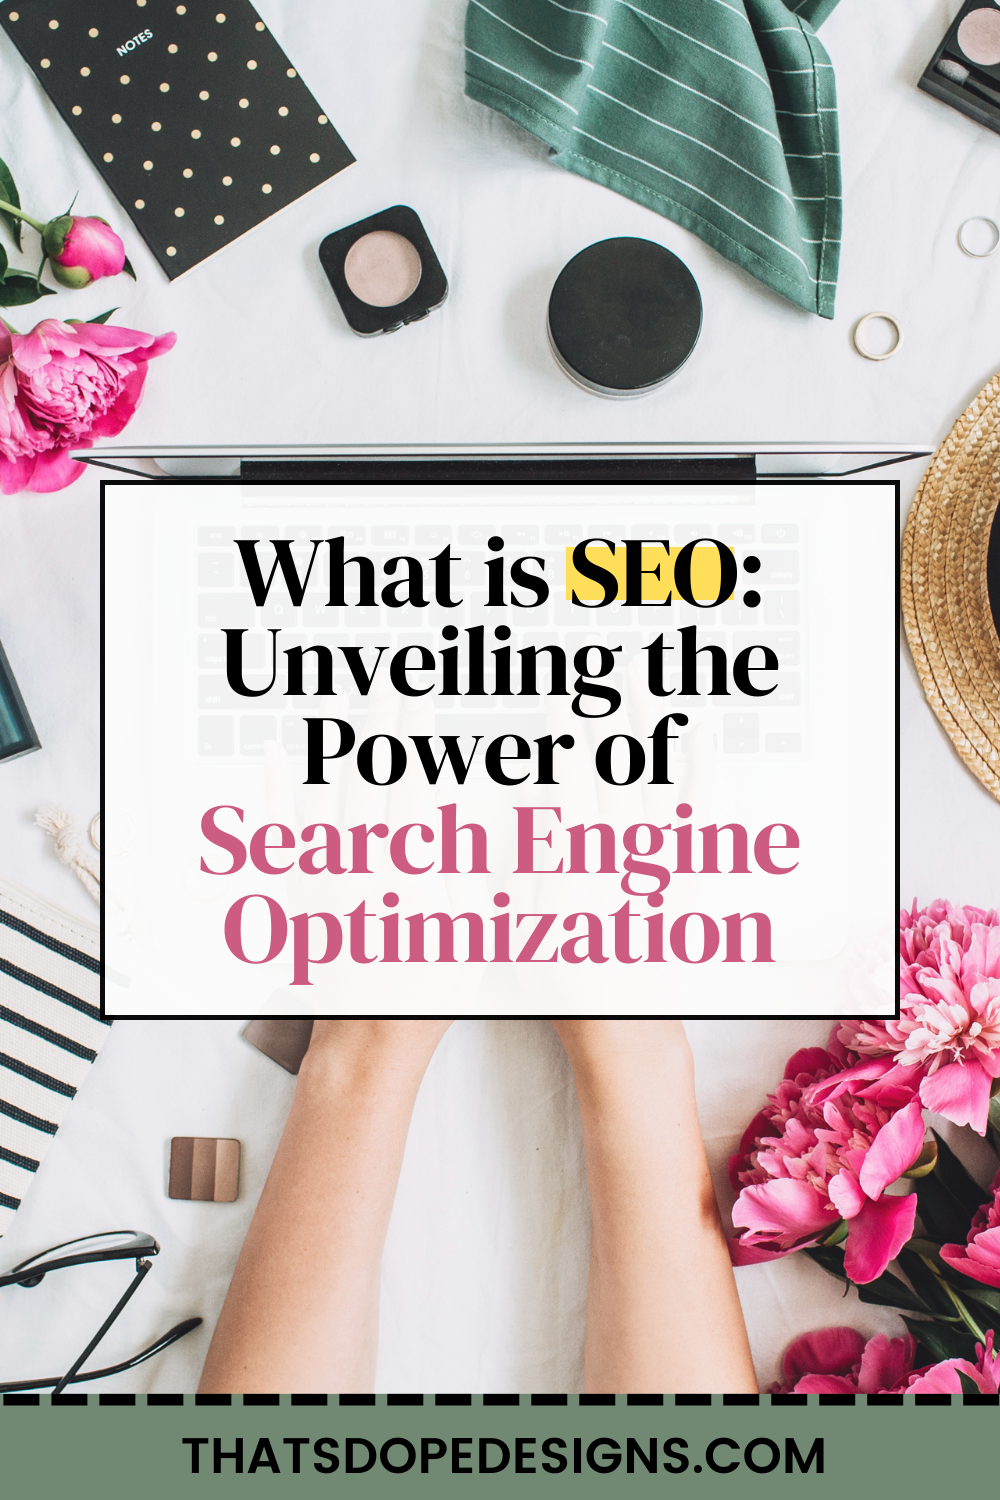 What is SEO: Unveiling the Power of Search Engine Optimization